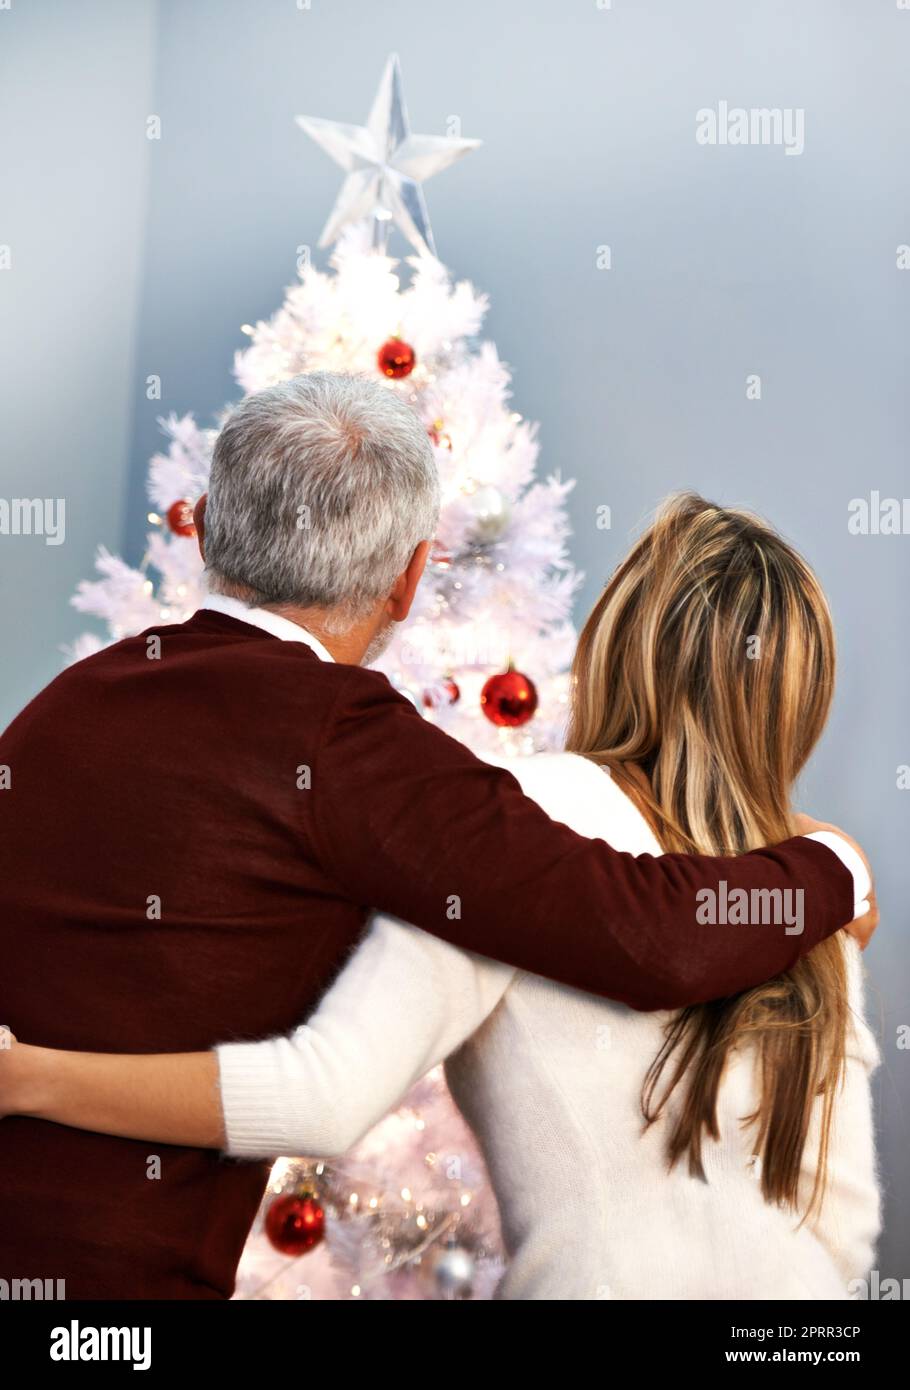 Precious family moments at Christmastime. Rear view shot of a couple bonding by their Christmas tree. Stock Photo